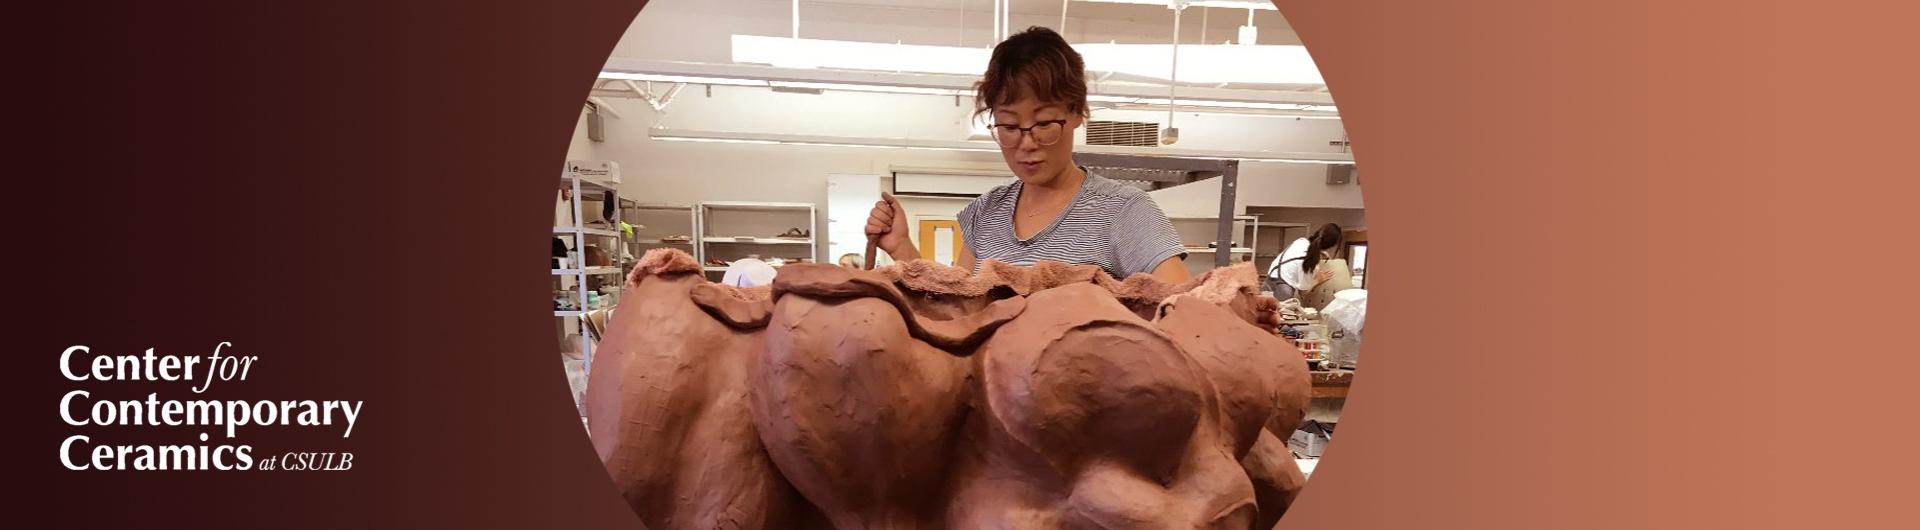 Ceramics student makes artwork with clay.